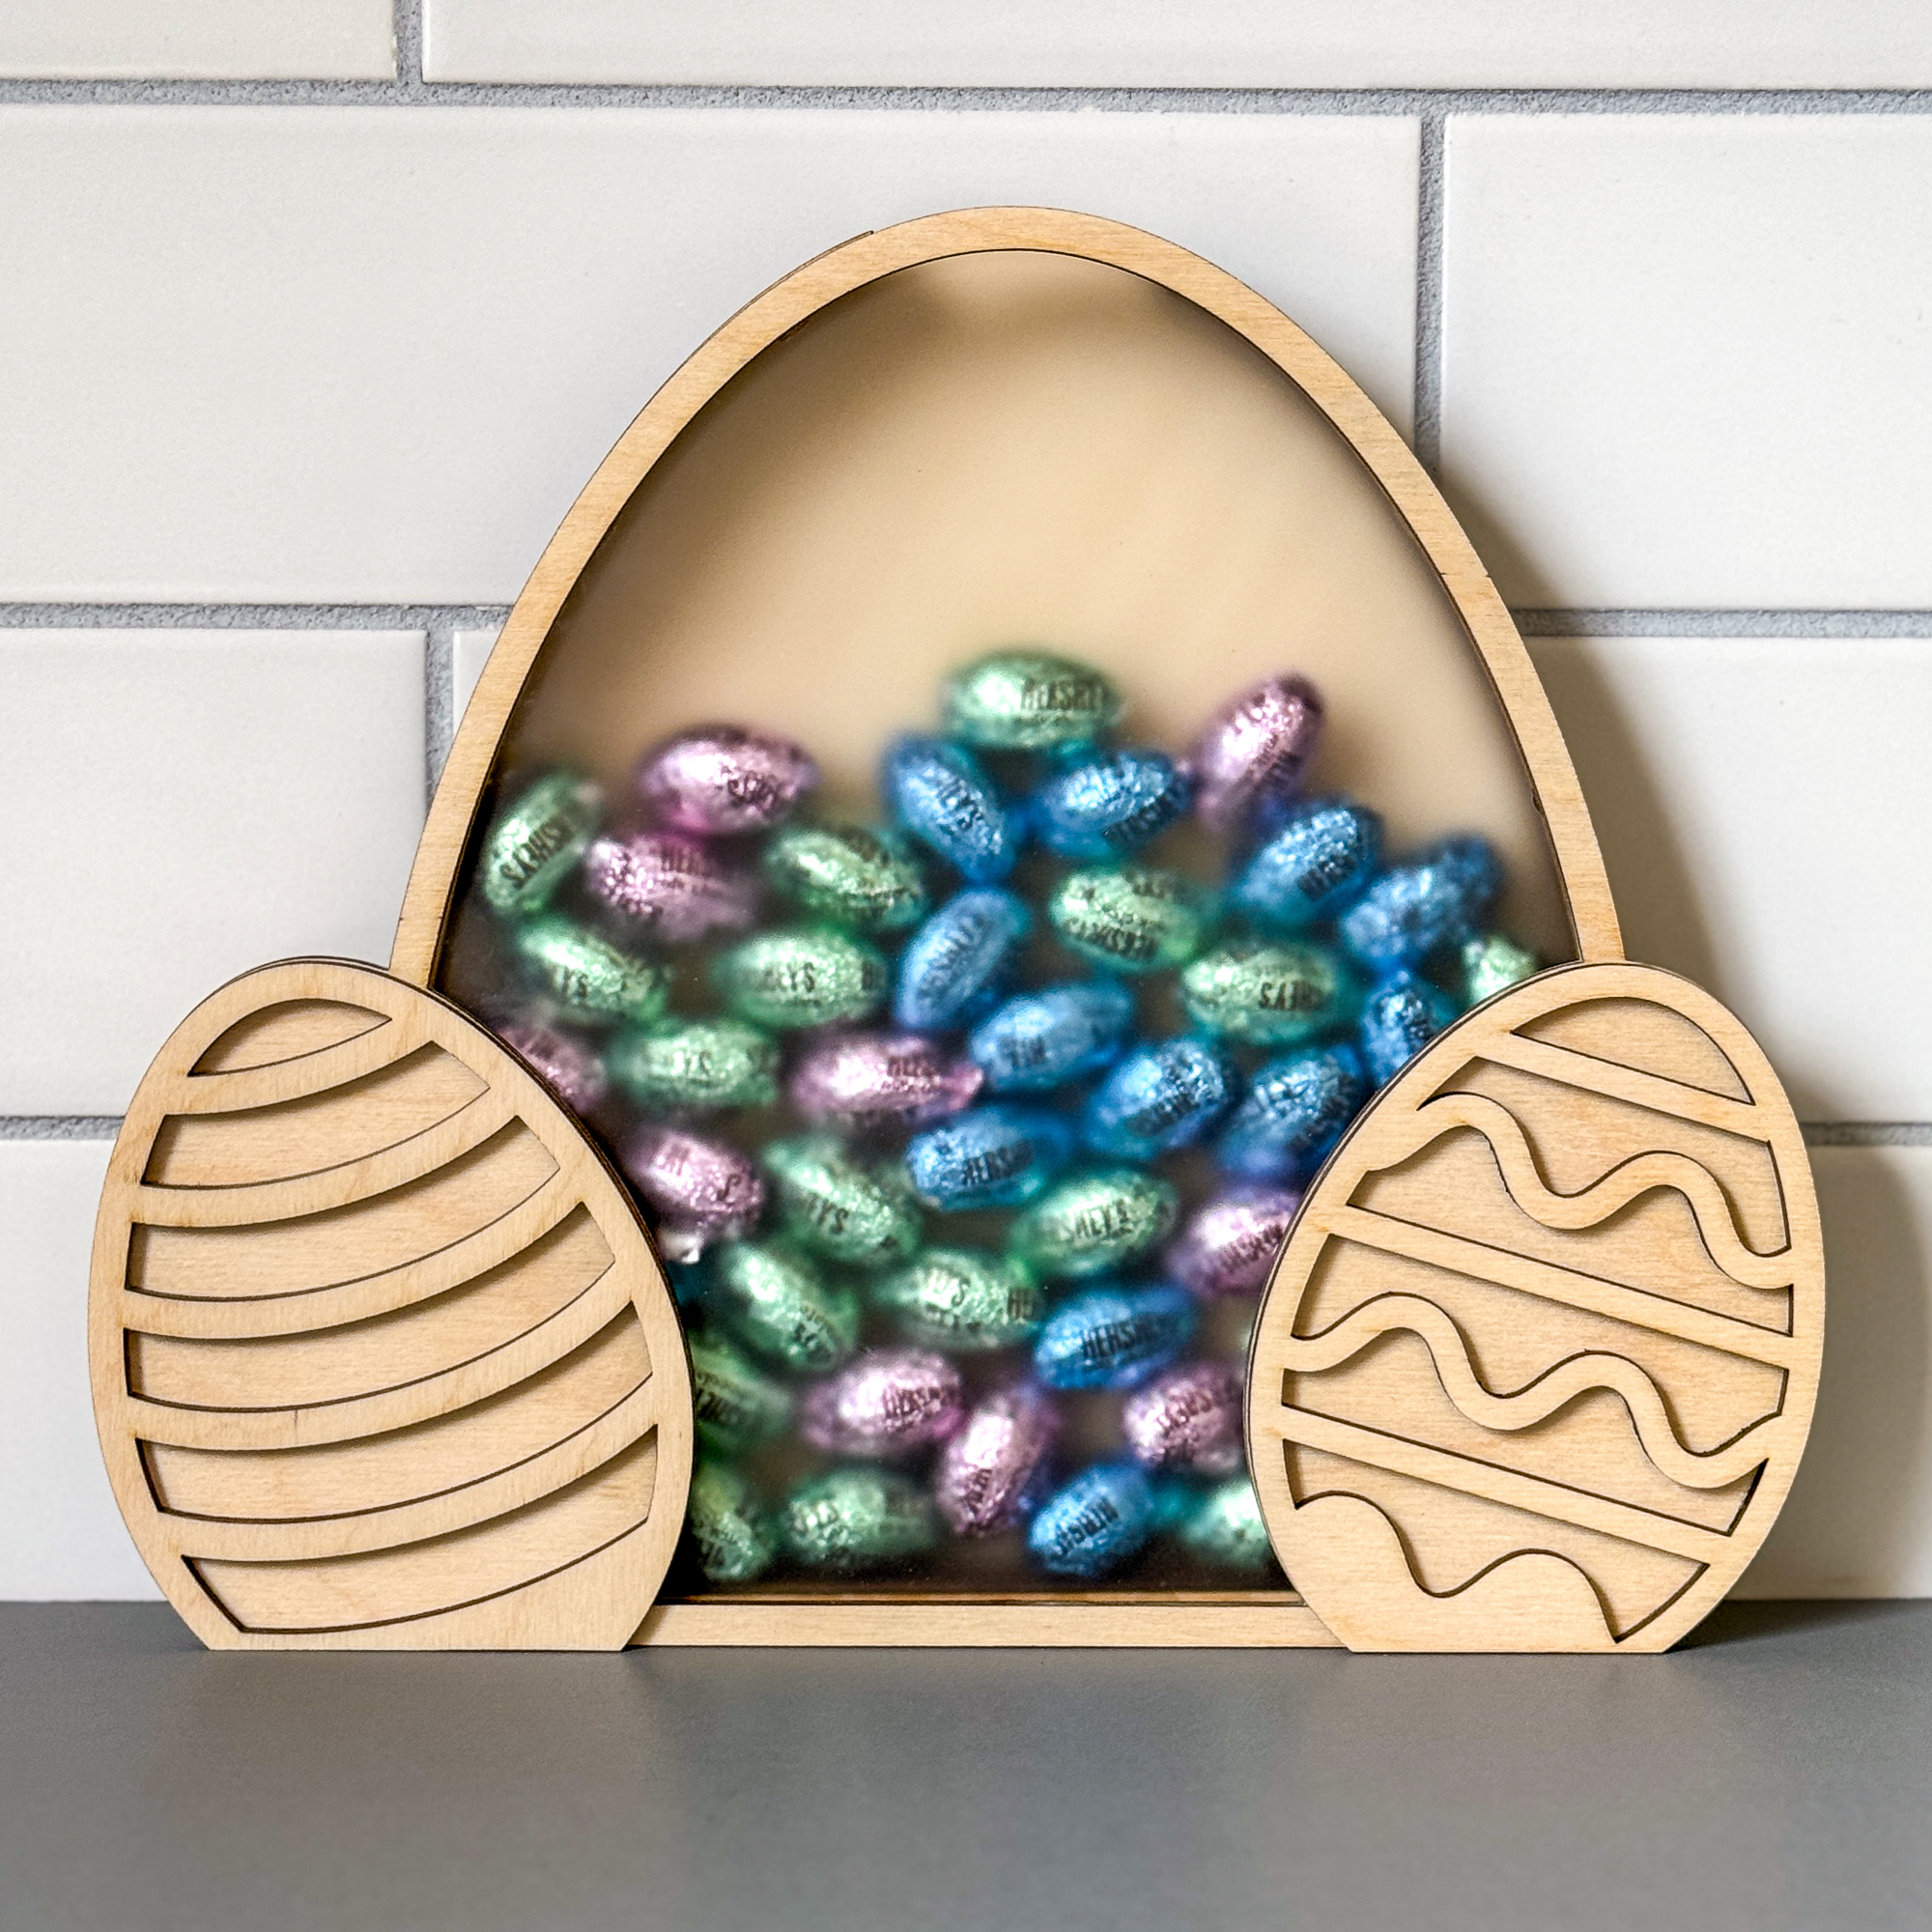 unpainted version of the Easter candy holder made of ⅛" plywood